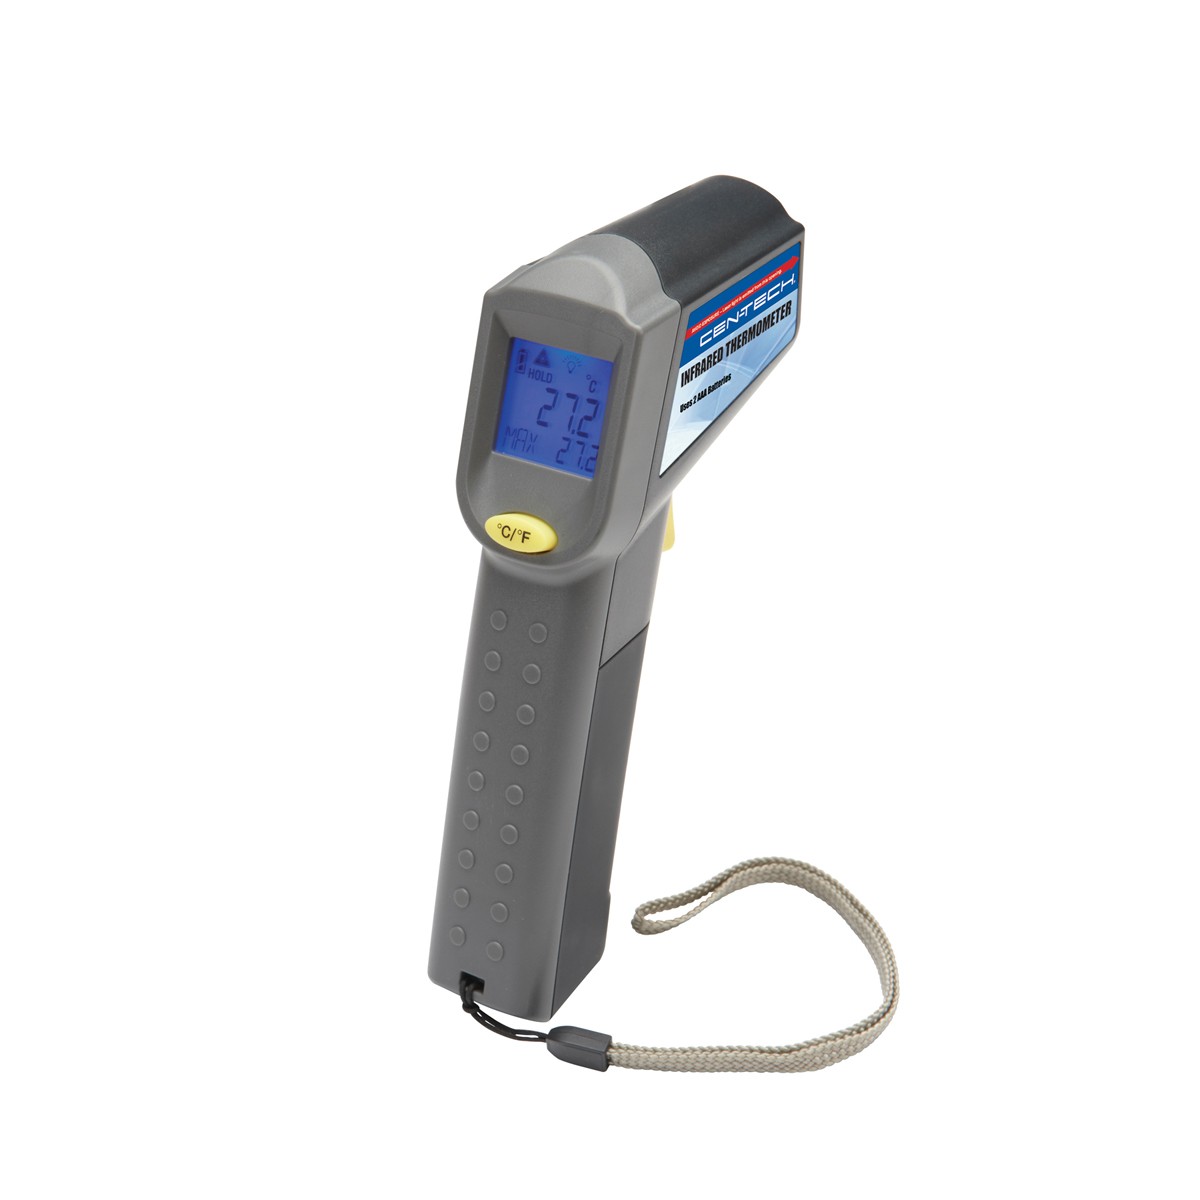 Cen-tech 60725 Infrared Non Contact Thermometer Hacks A Marketplace Of Ideas